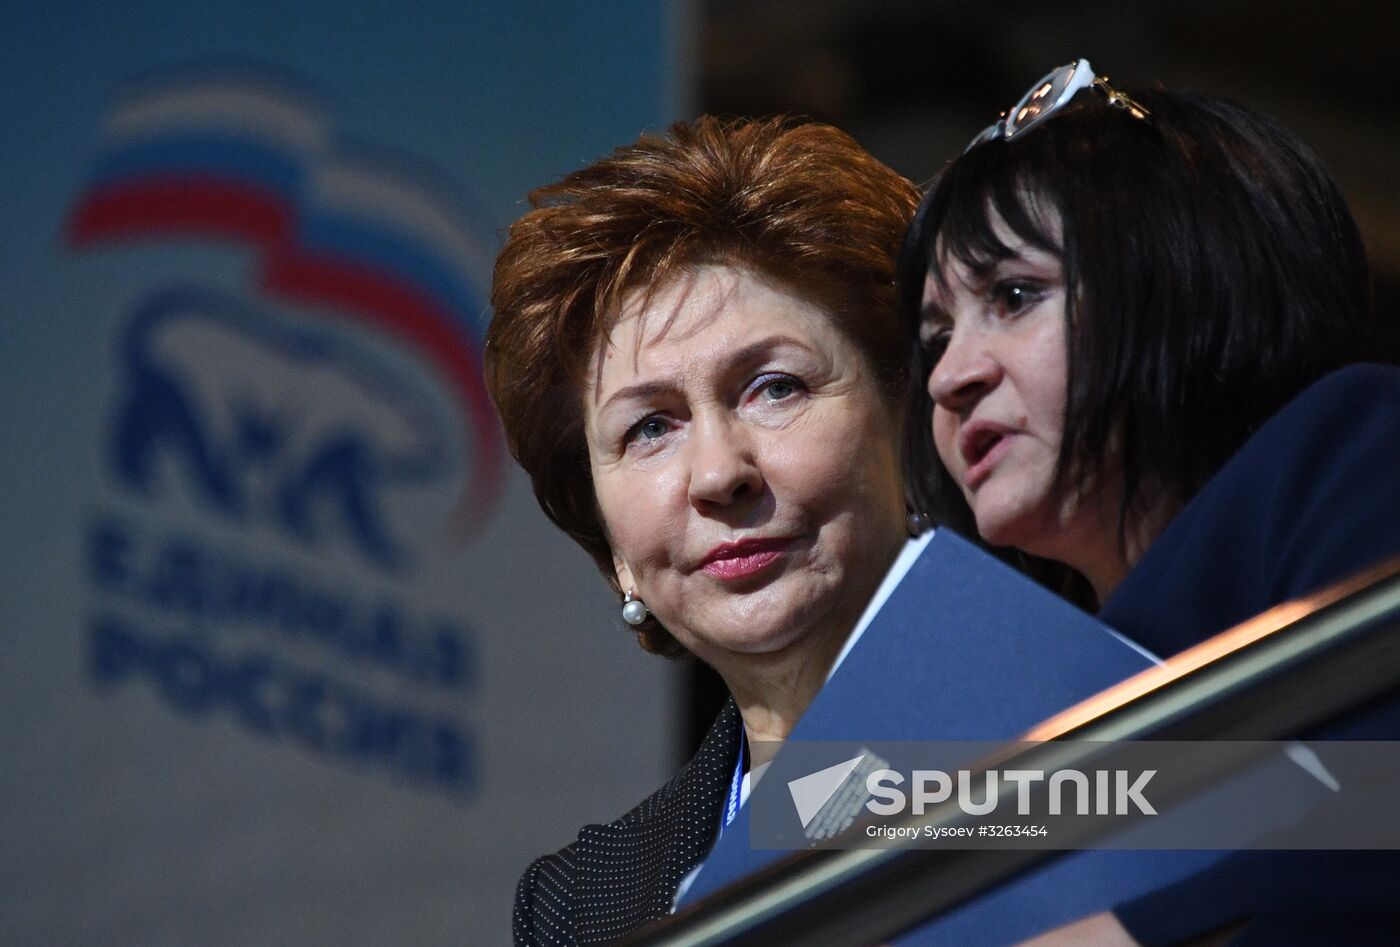 17th Congress of United Russia party